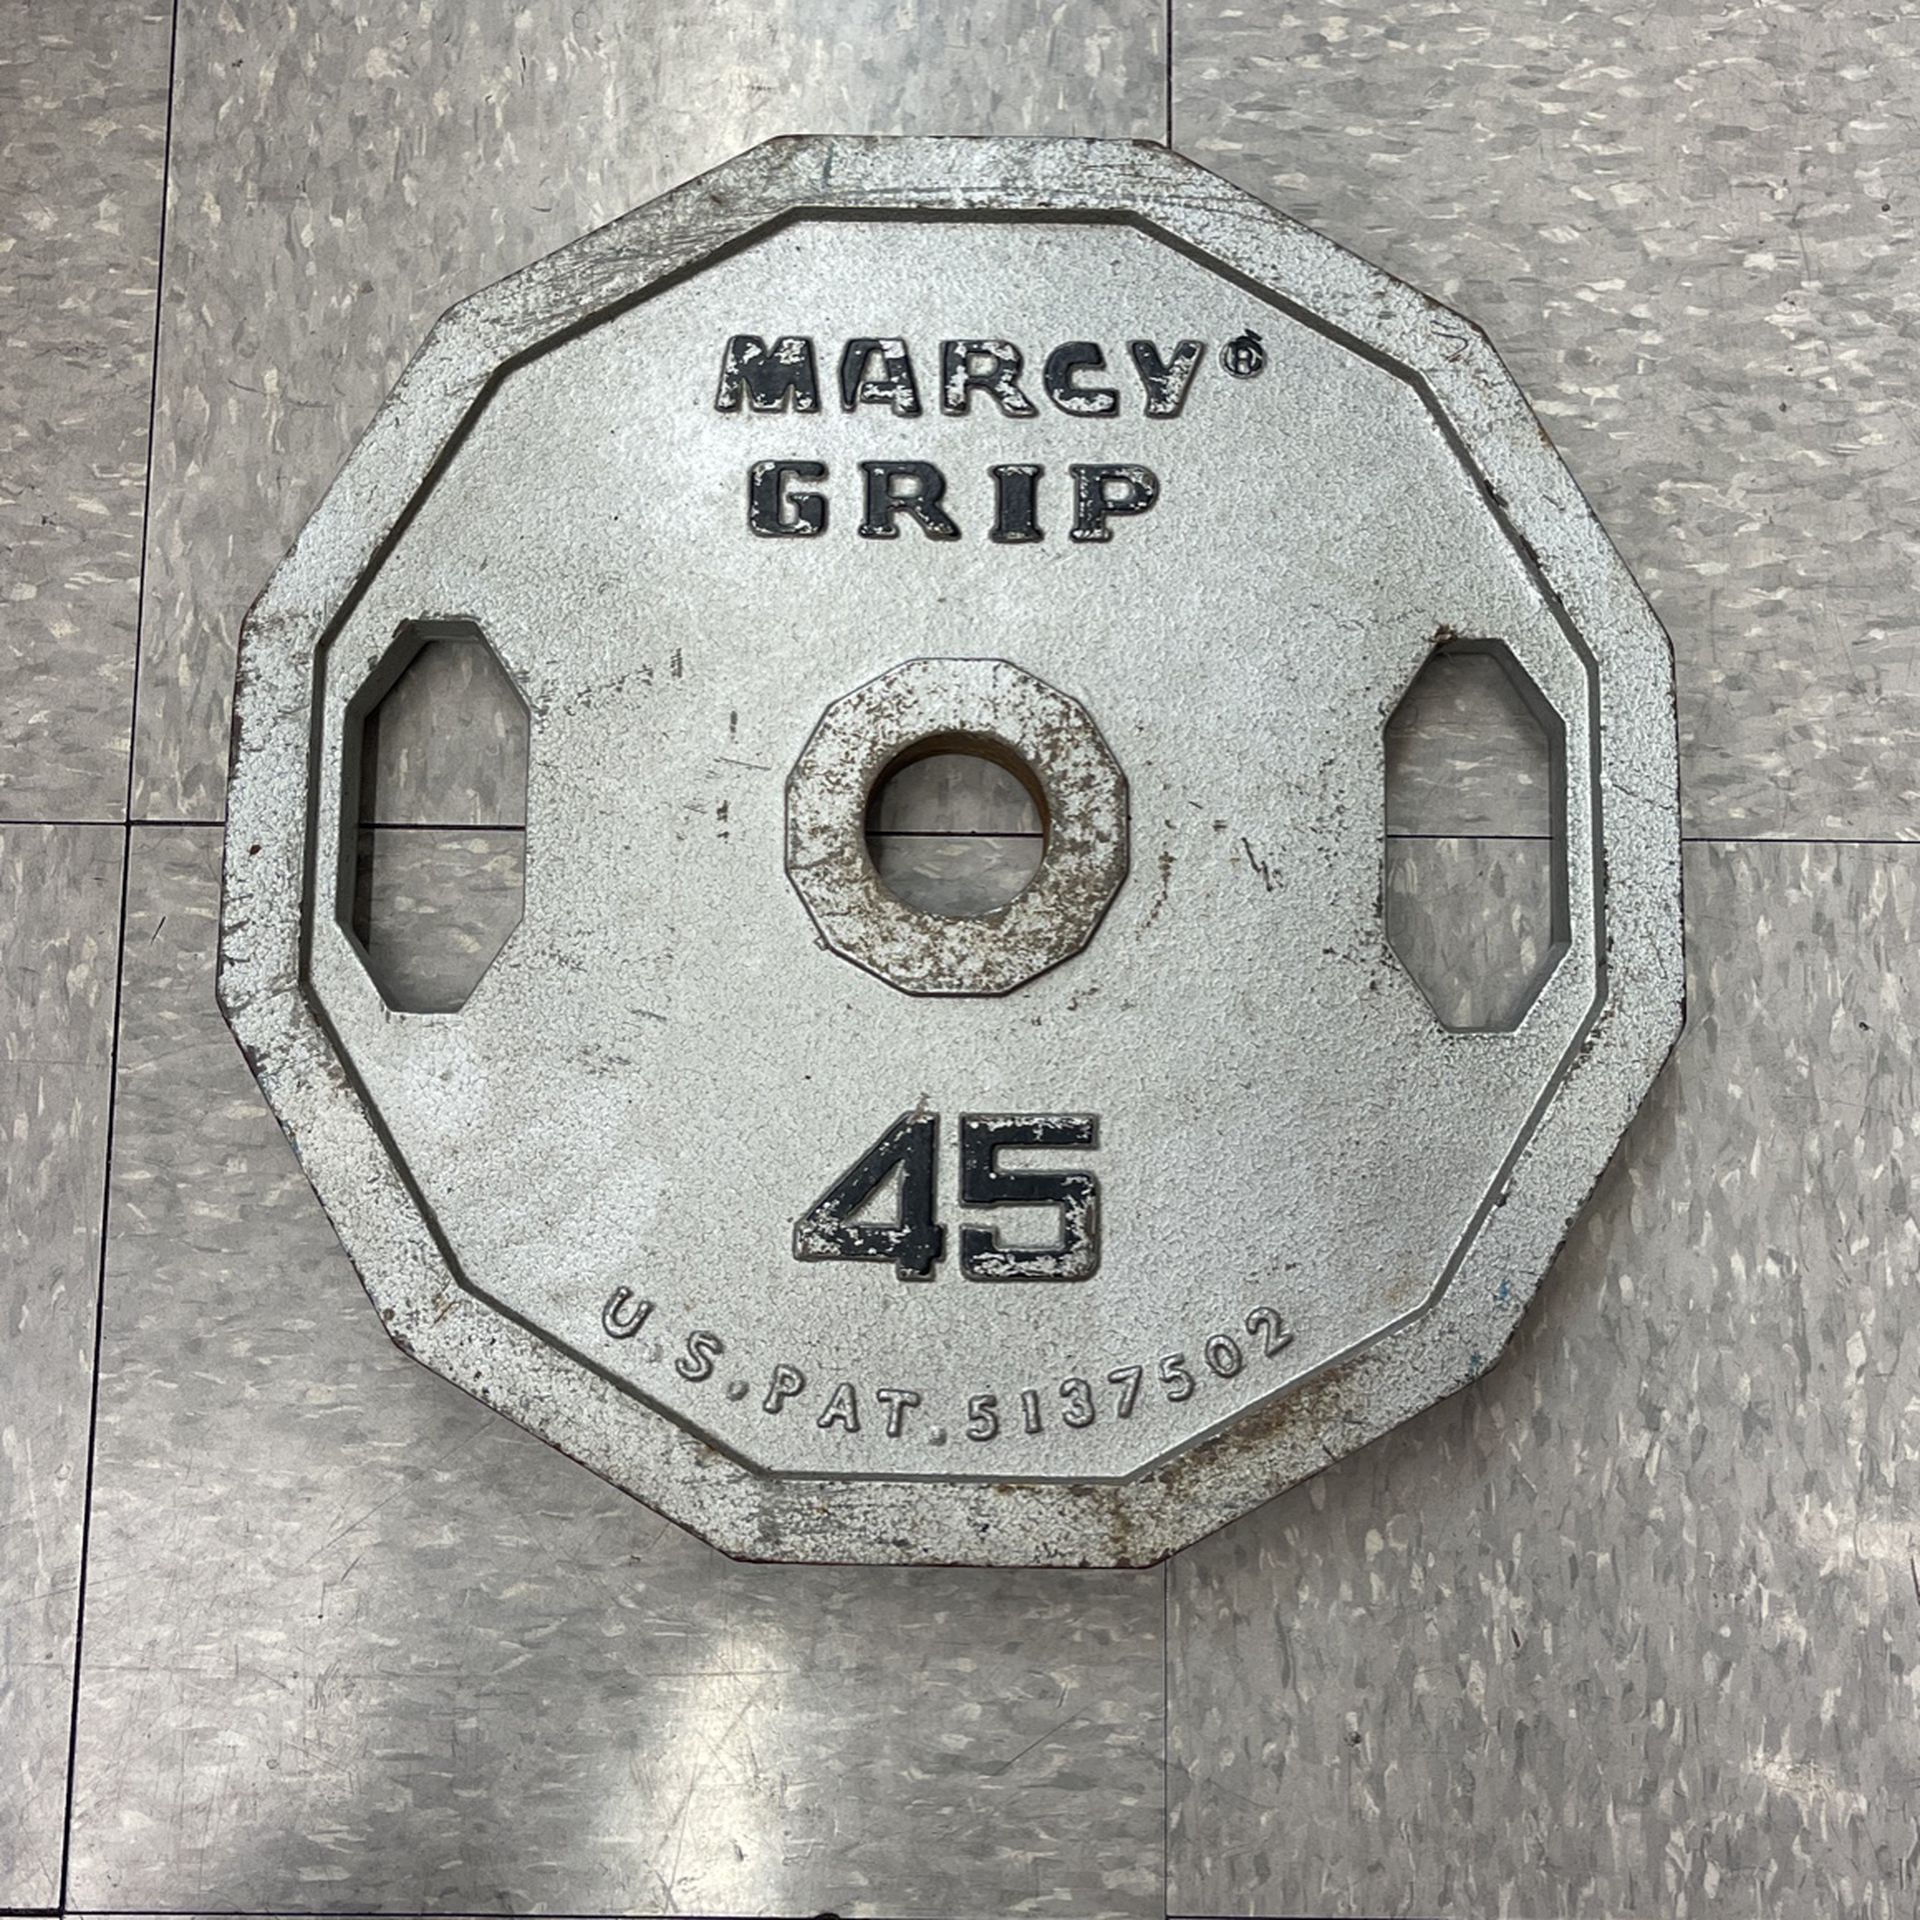 45lbs Marcy Grip Iron Weights